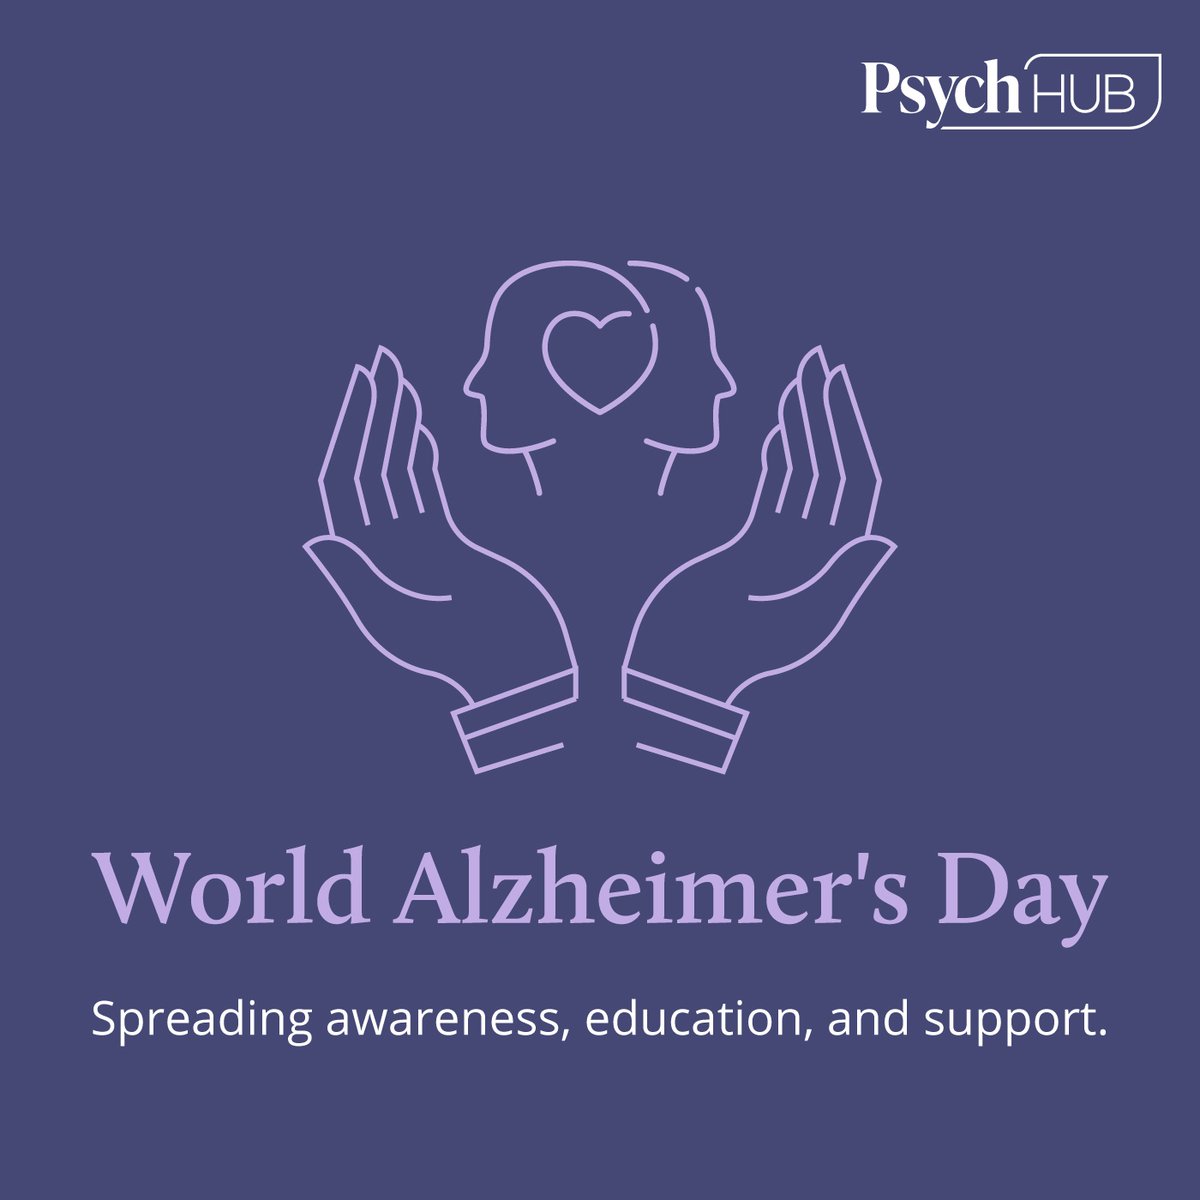 On #WorldAlzheimersDay, let's not forget the caregivers providing support. Psych Hub’s Support for Caregivers playlist includes short videos on topics such as coping skills, tips for managing stress, setting boundaries, and preventing burnout. bit.ly/3Ph789J